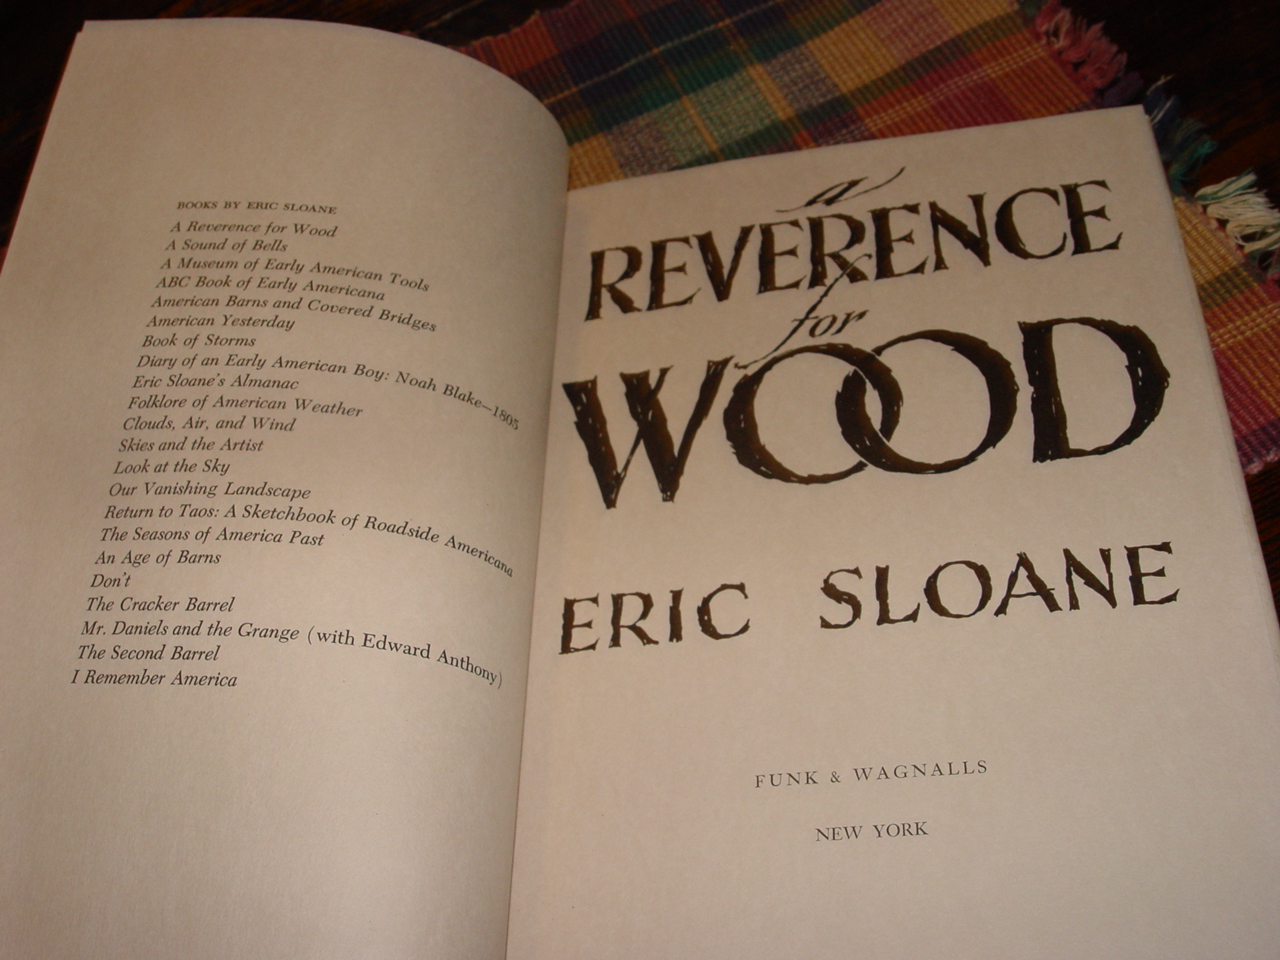 Eric Sloane, A Reverence for Wood